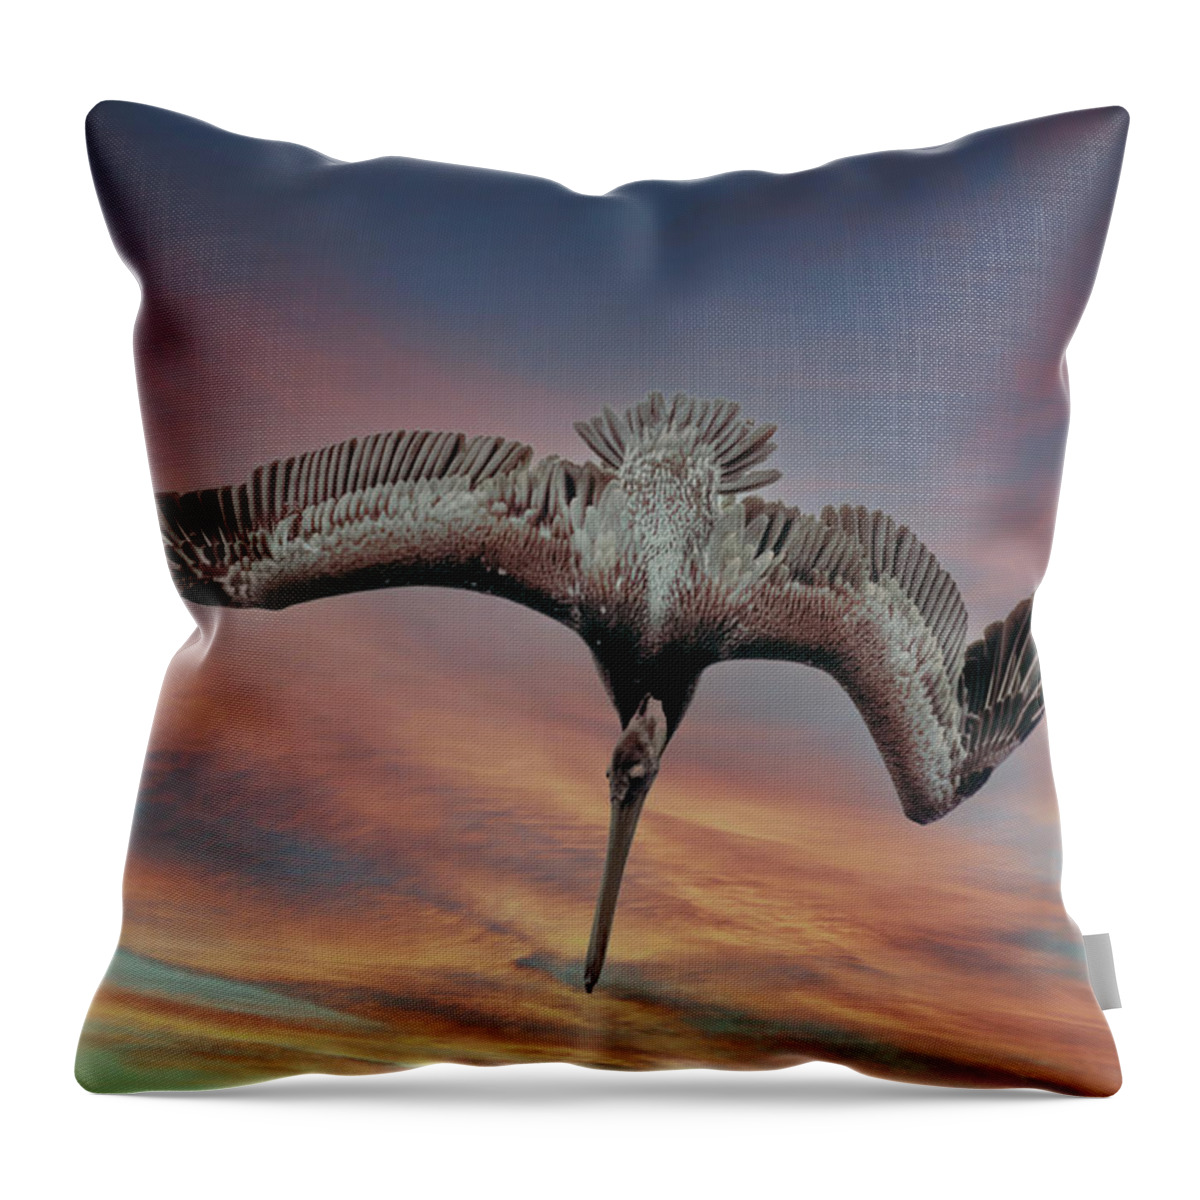 Pelican Throw Pillow featuring the photograph Diving Pelican by Jerry Cahill